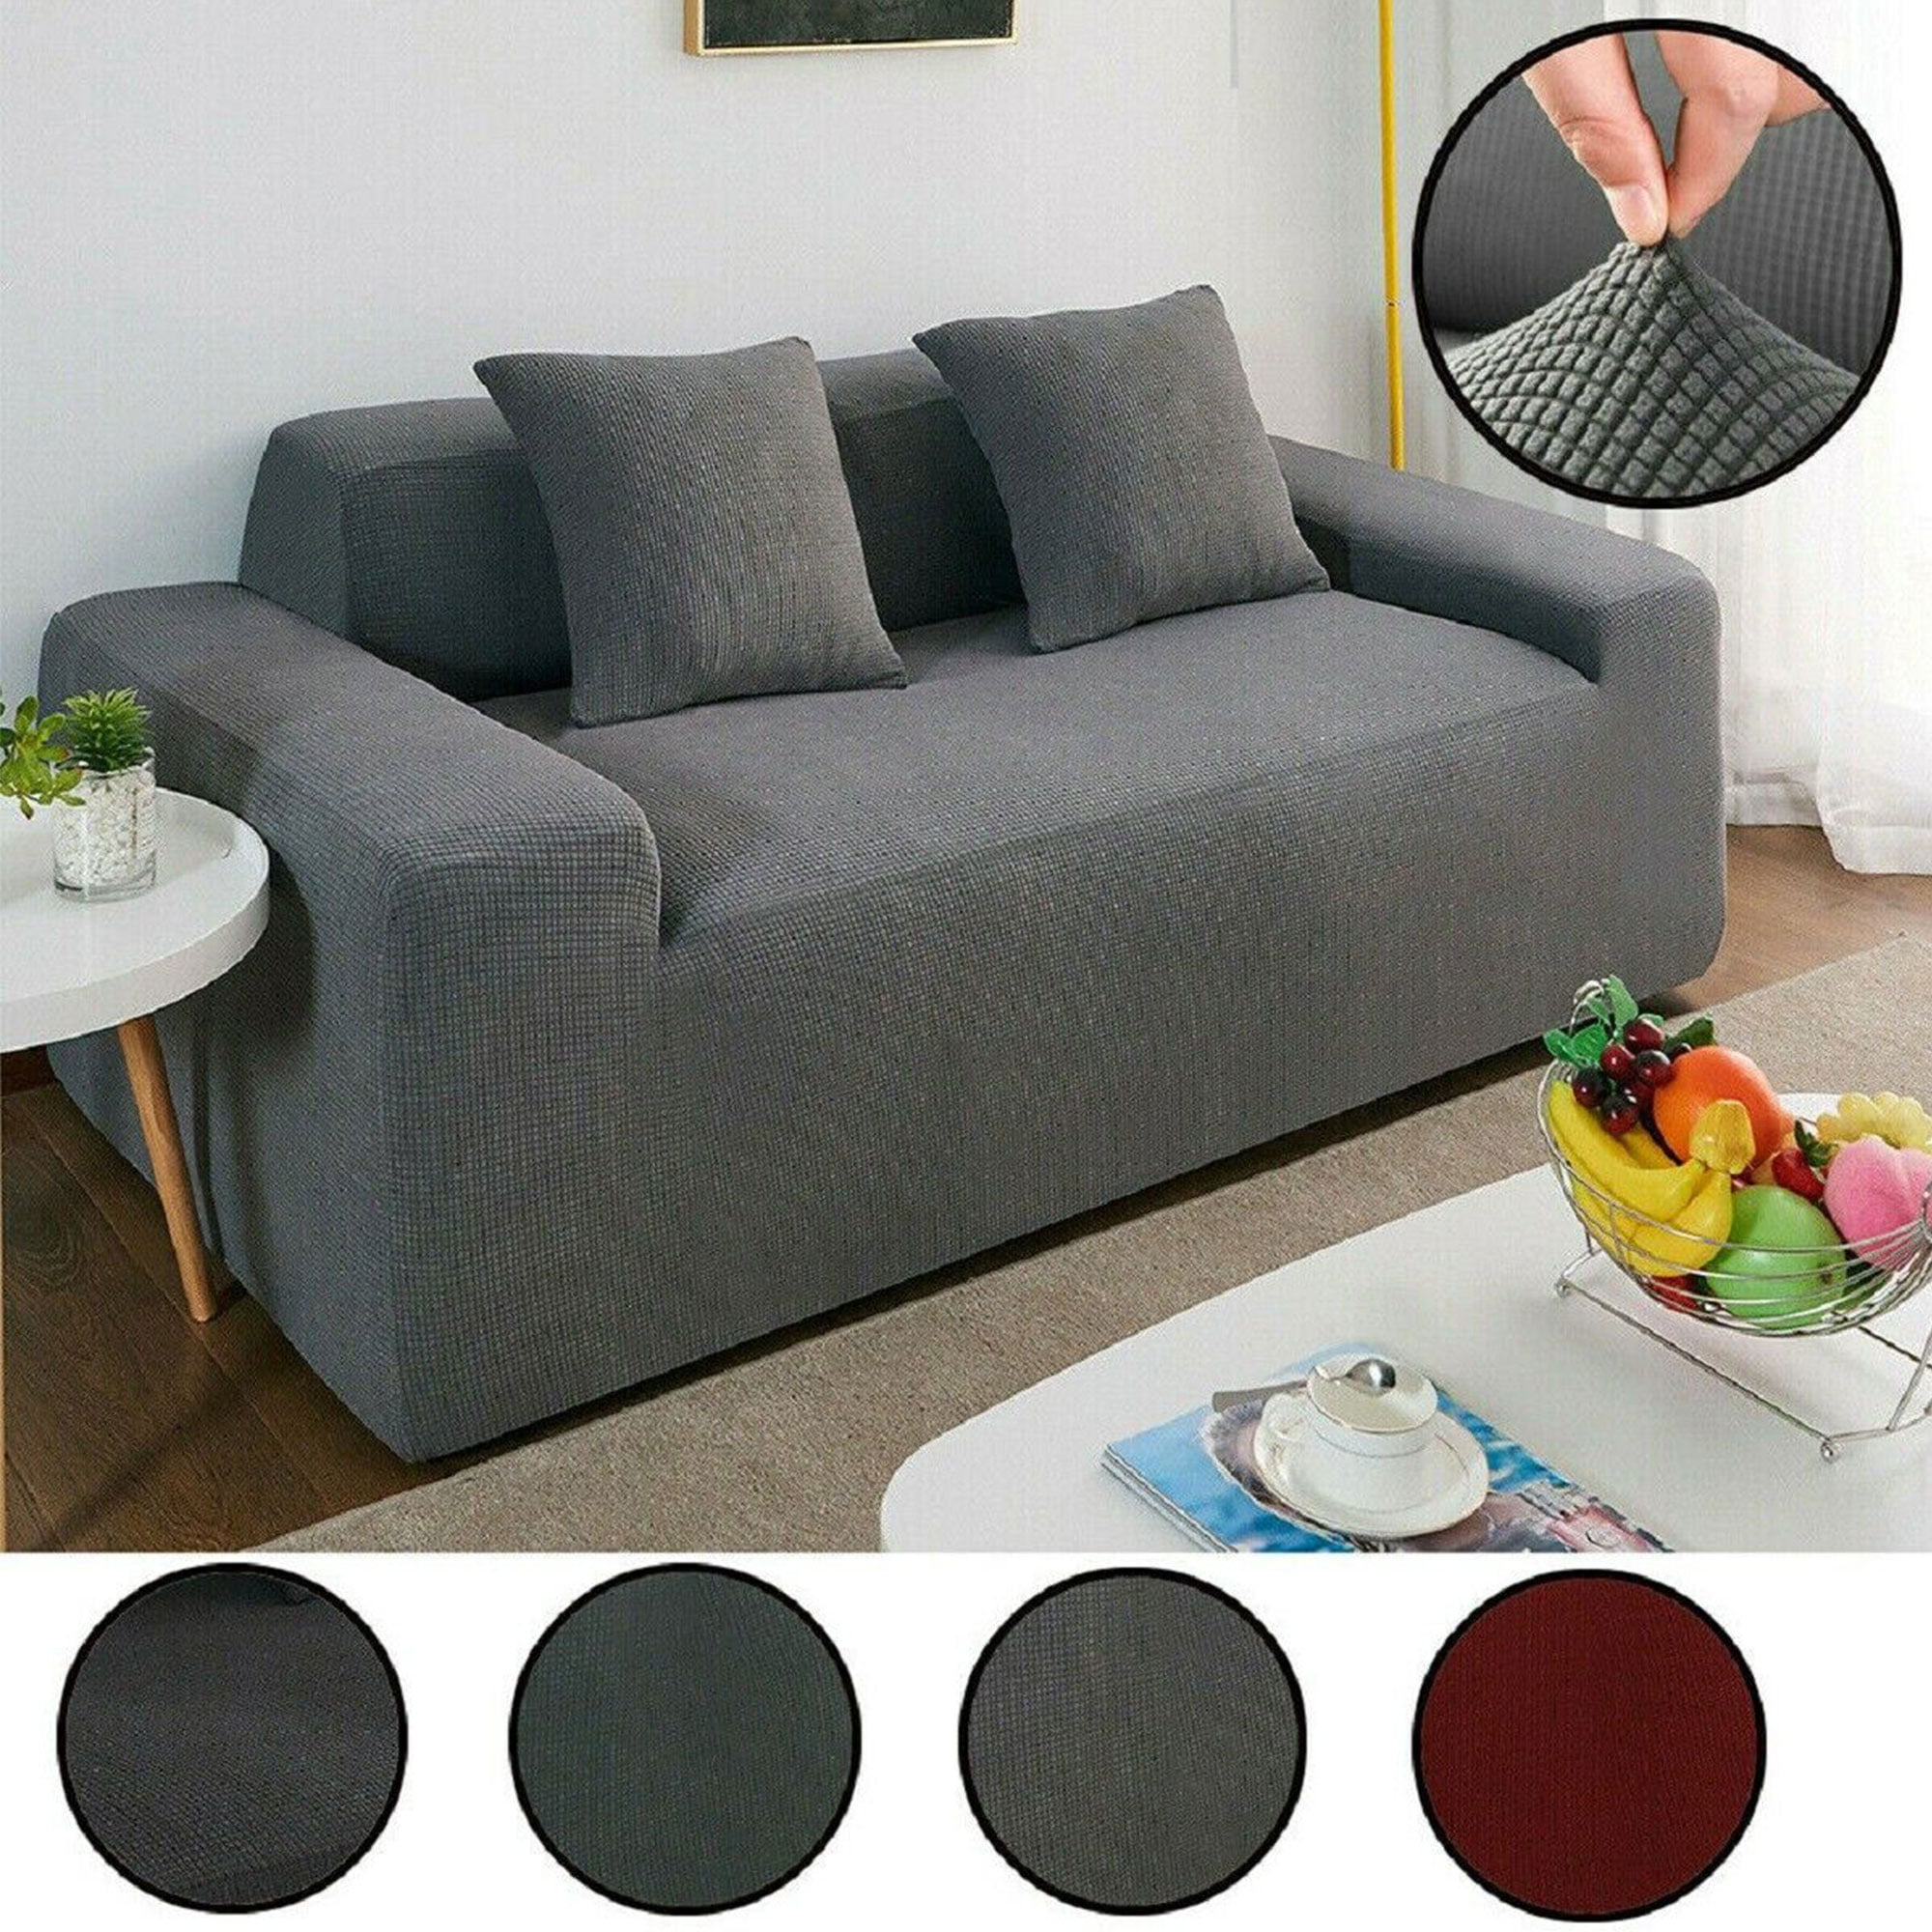 Pure Color Stretch Elastic Slipcover Sofa Protect Full Cover Couch 1 2 3 4 Seat 